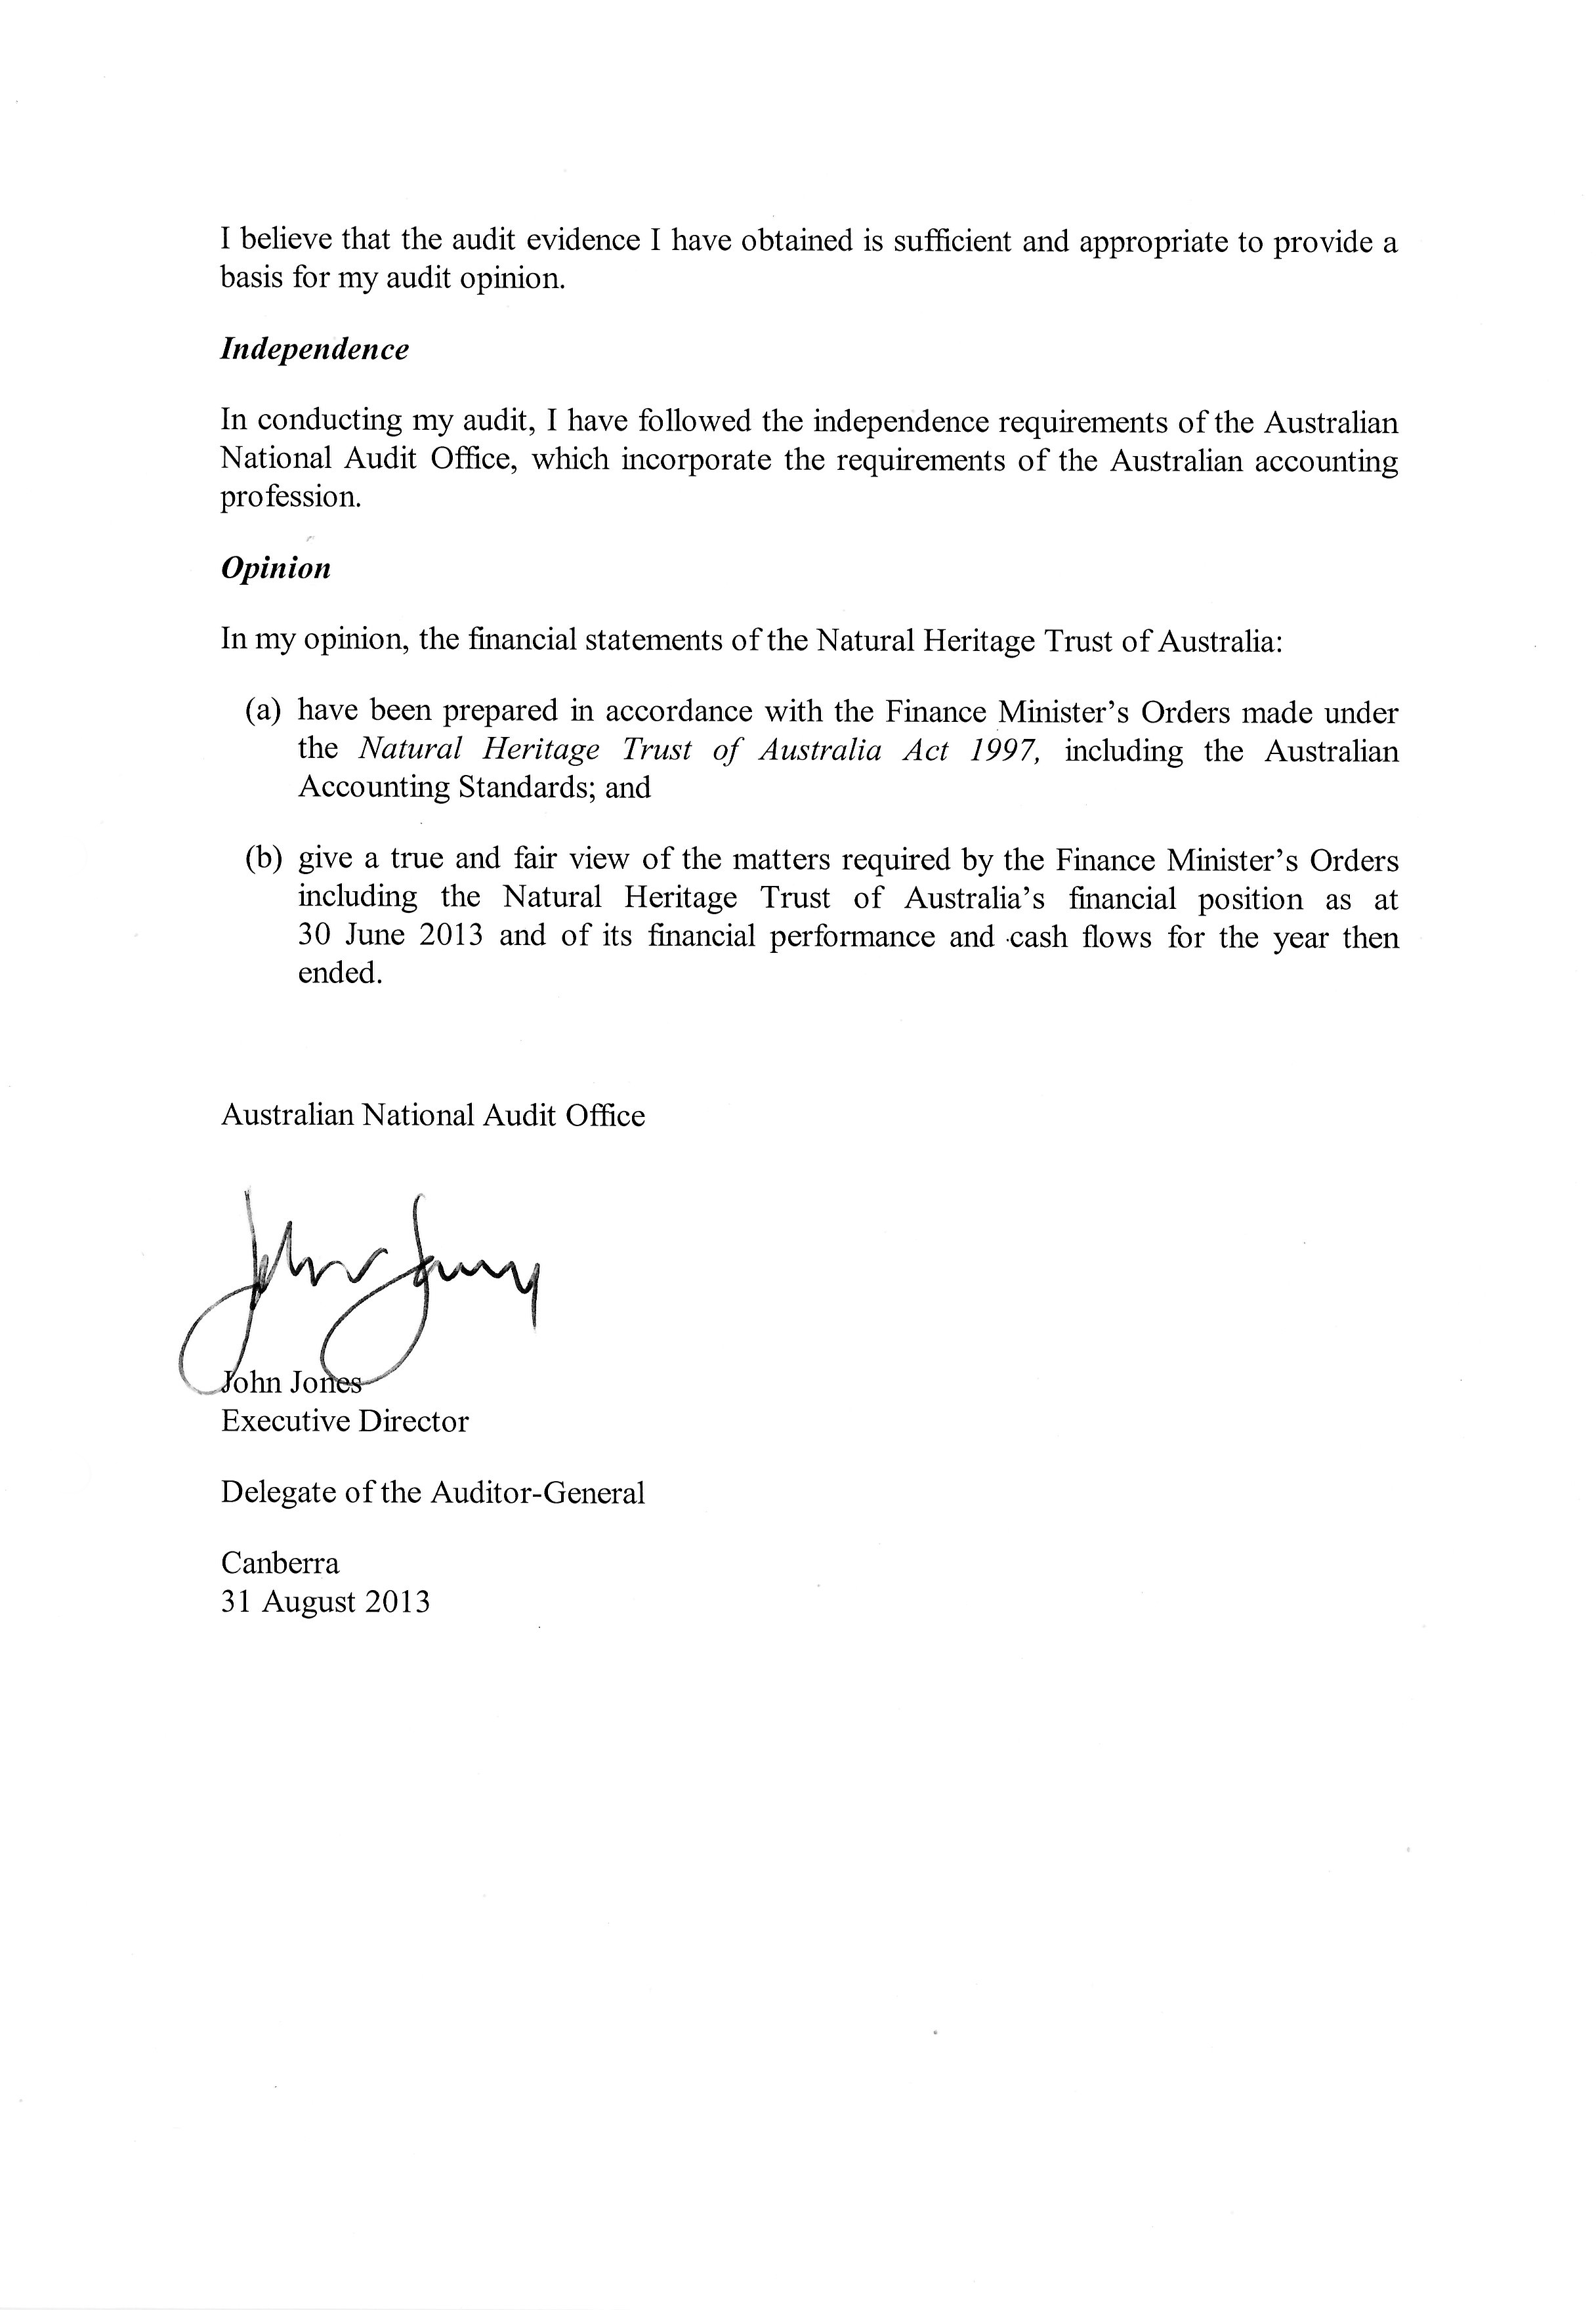 independent auditor’s report for the financial statements of the natural heritage trust of australia. covering letter to the minister for the environment, heritage and water. signed john jones, executive director, australian national audit office, delegate of the auditor-general, canberra, 31 august 2013 (page 2 of 2).  